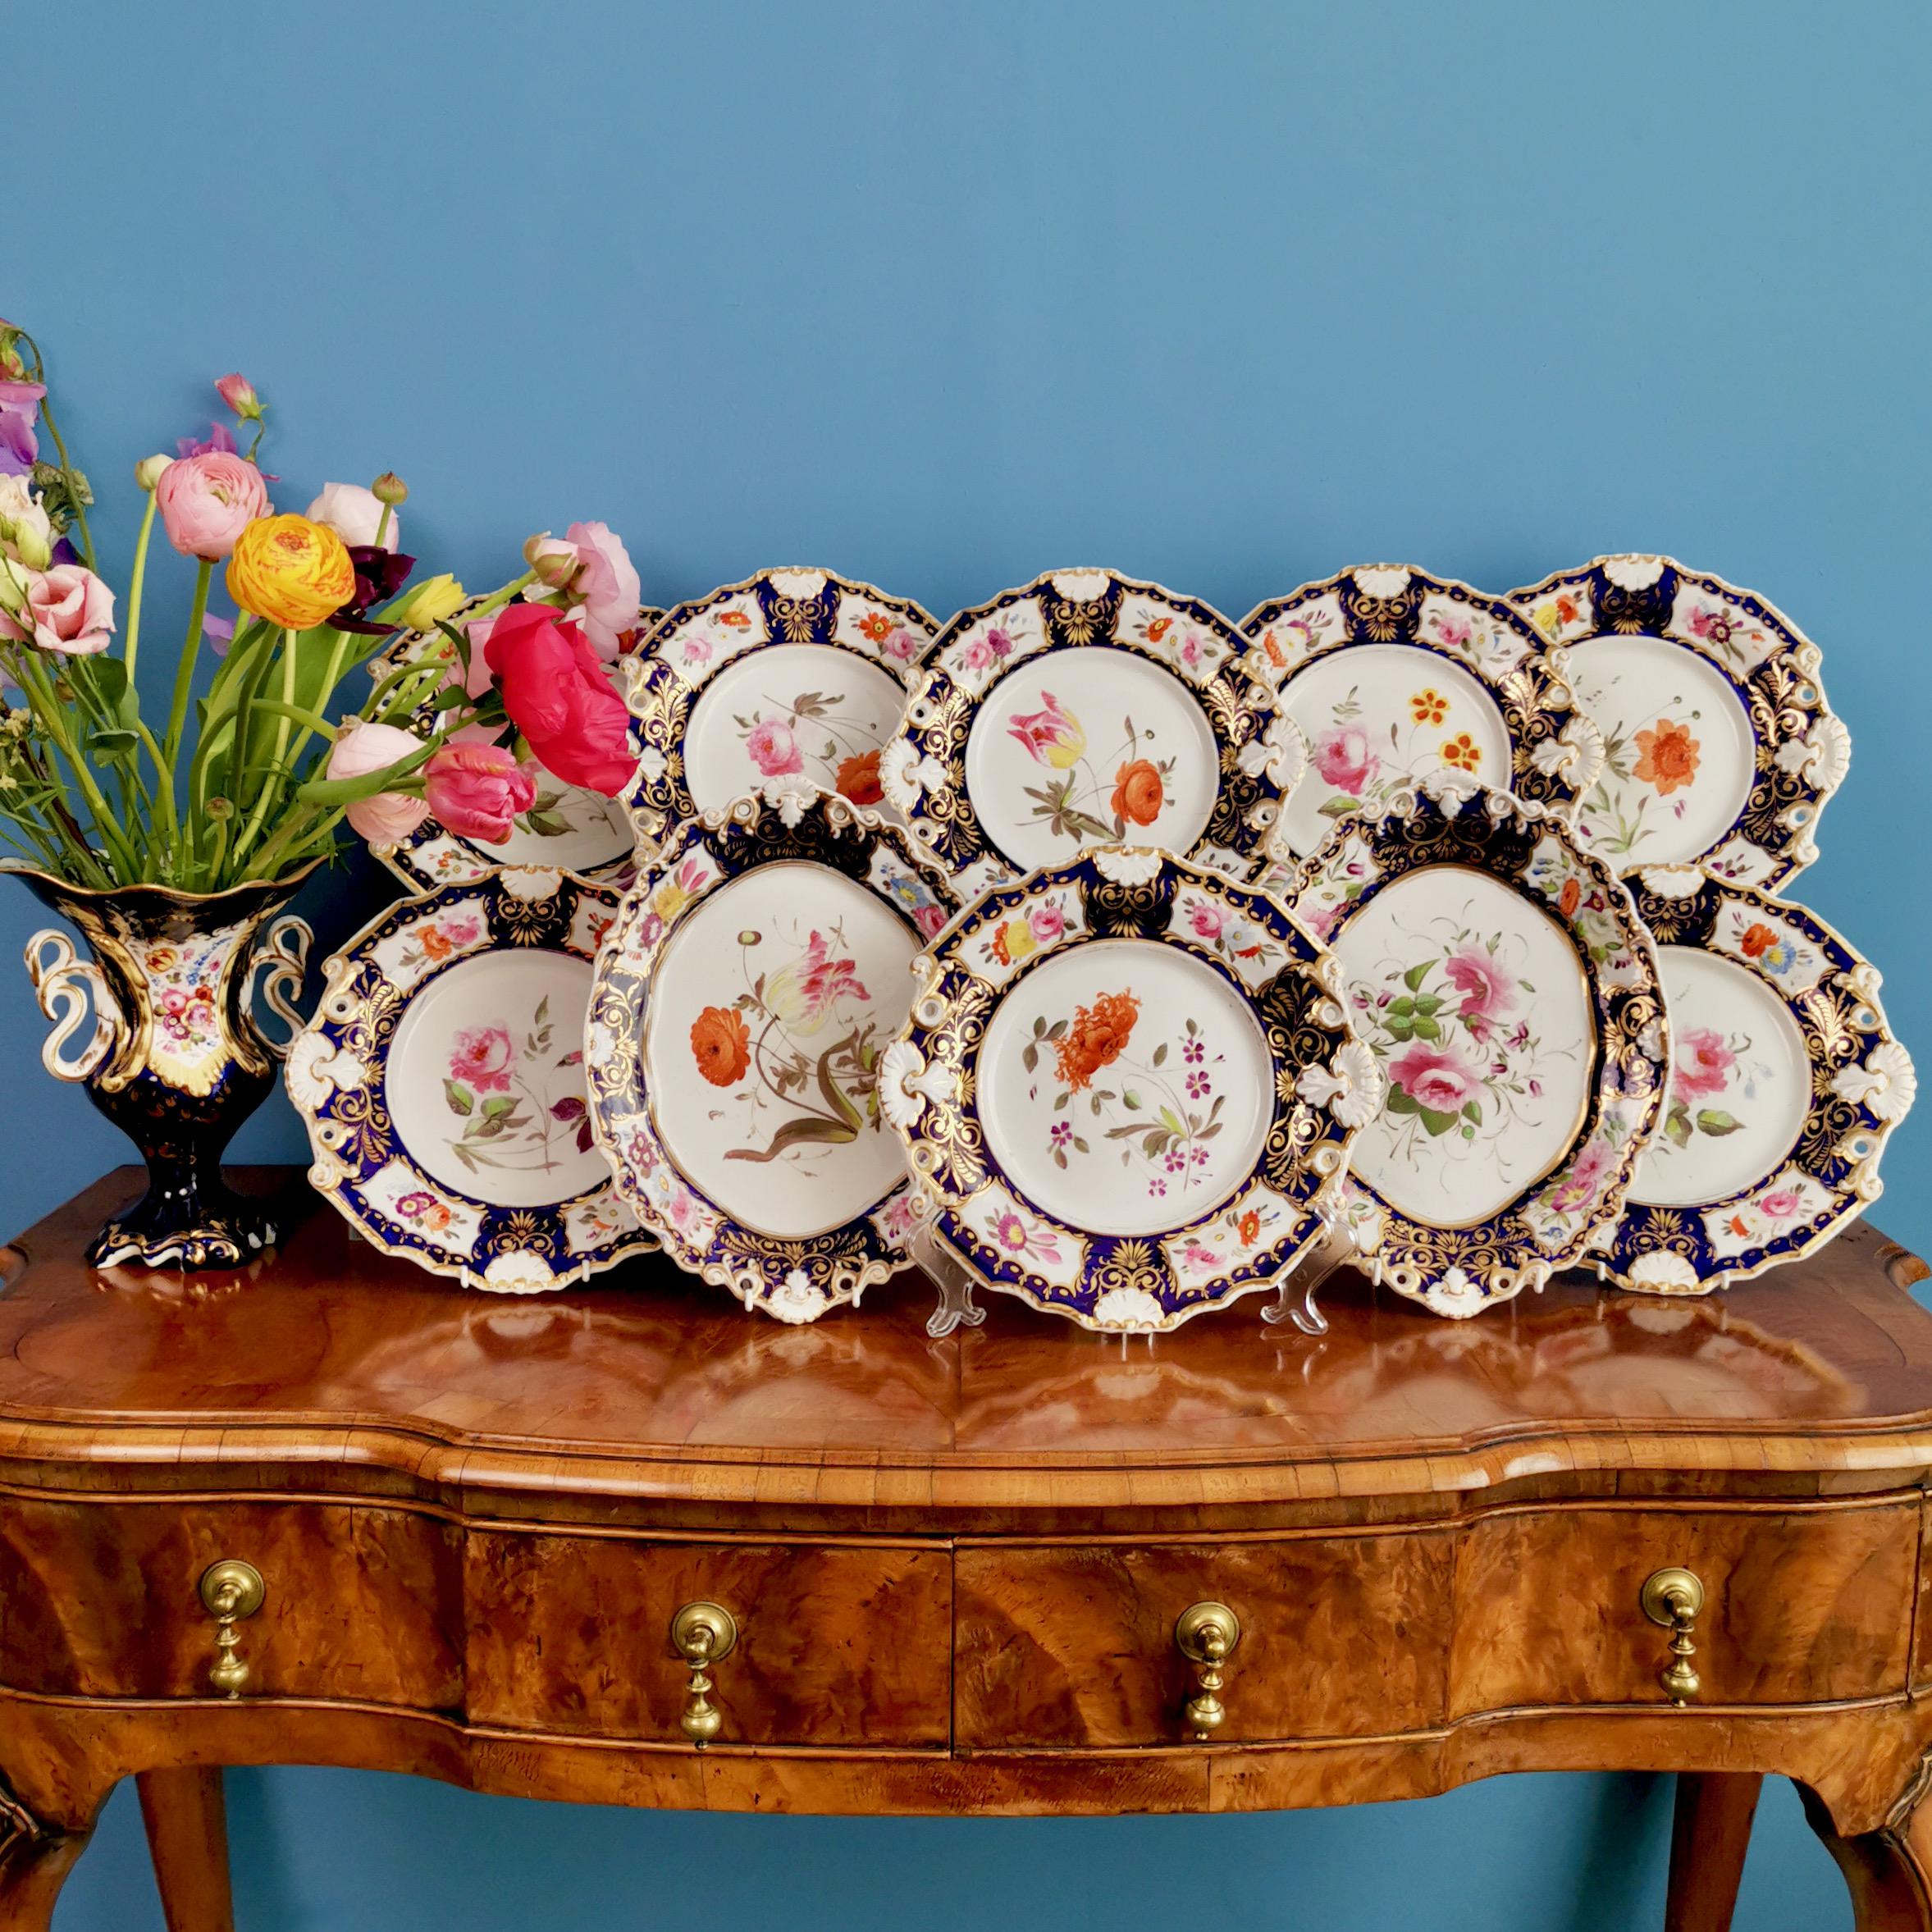 This is a very striking and rare part dessert service made by New Hall between 1824 and 1830. The service consists of 8 plates and 2 oval serving dishes, and is decorated in cobalt blue, gilt and stunning flower paintings in the central reserve and